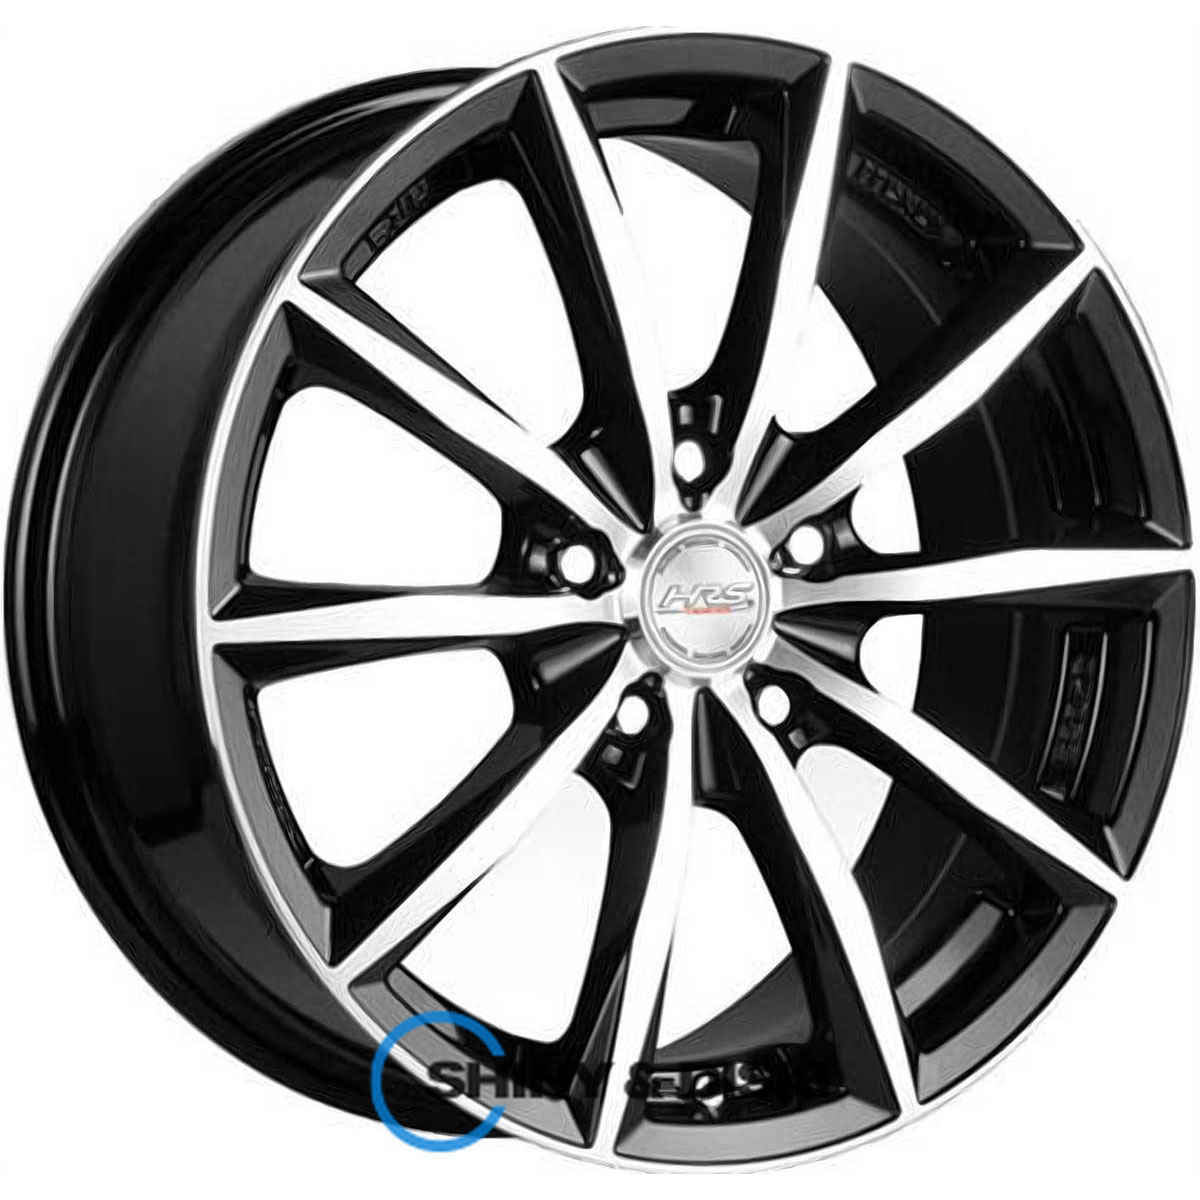 rs tuning h-536 bkfp r15 w6.5 pcd5x114.3 et40 dia67.1